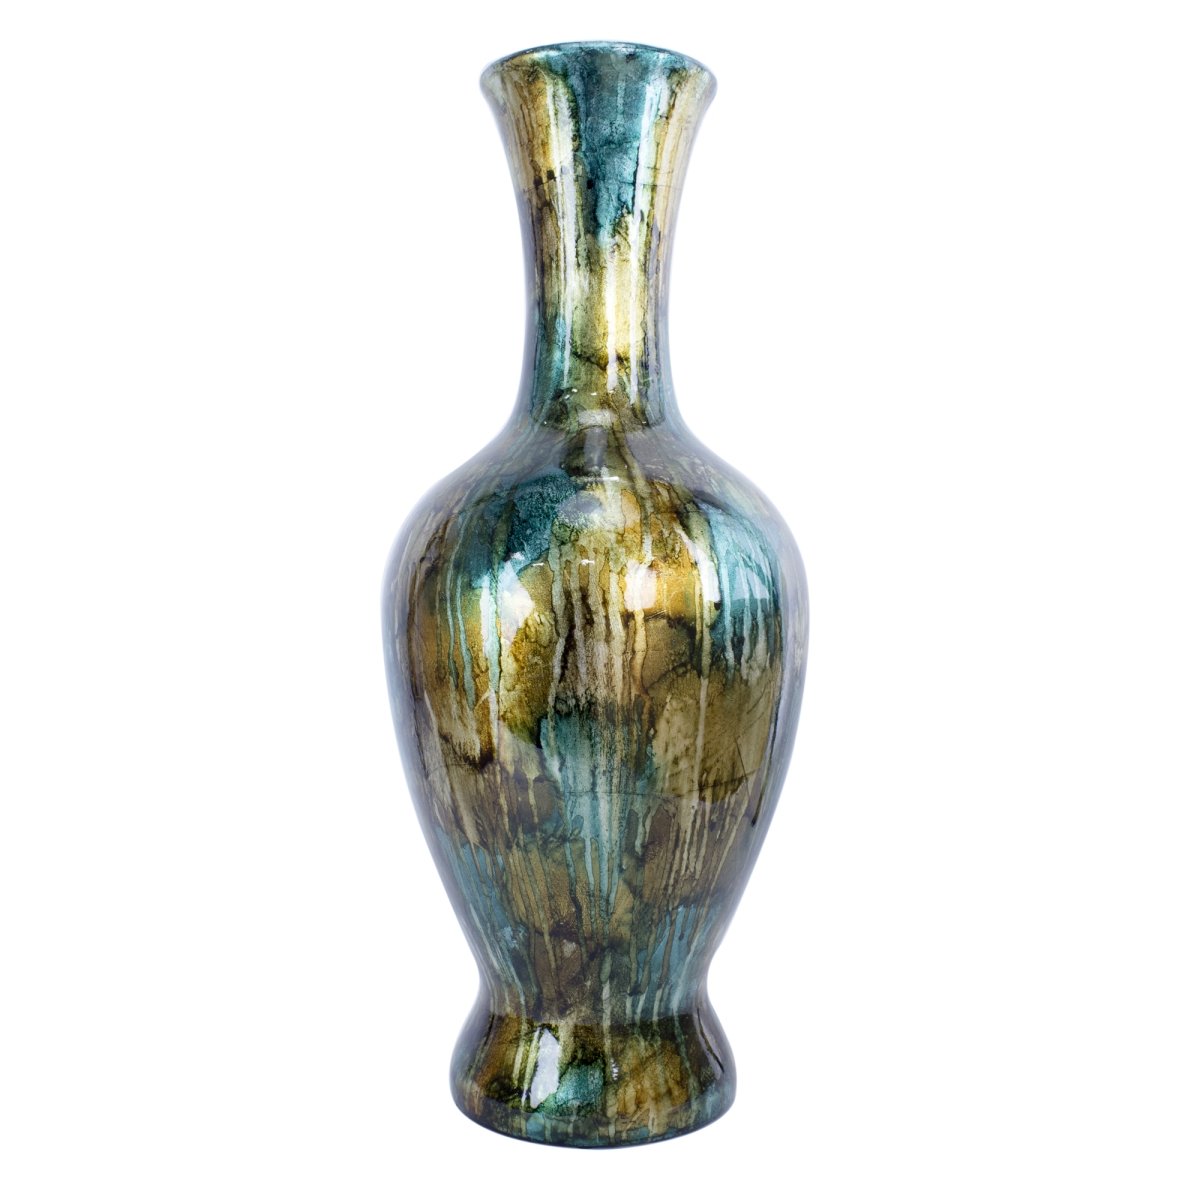 20 In. Mary Foiled & Lacquered Ceramic Vase